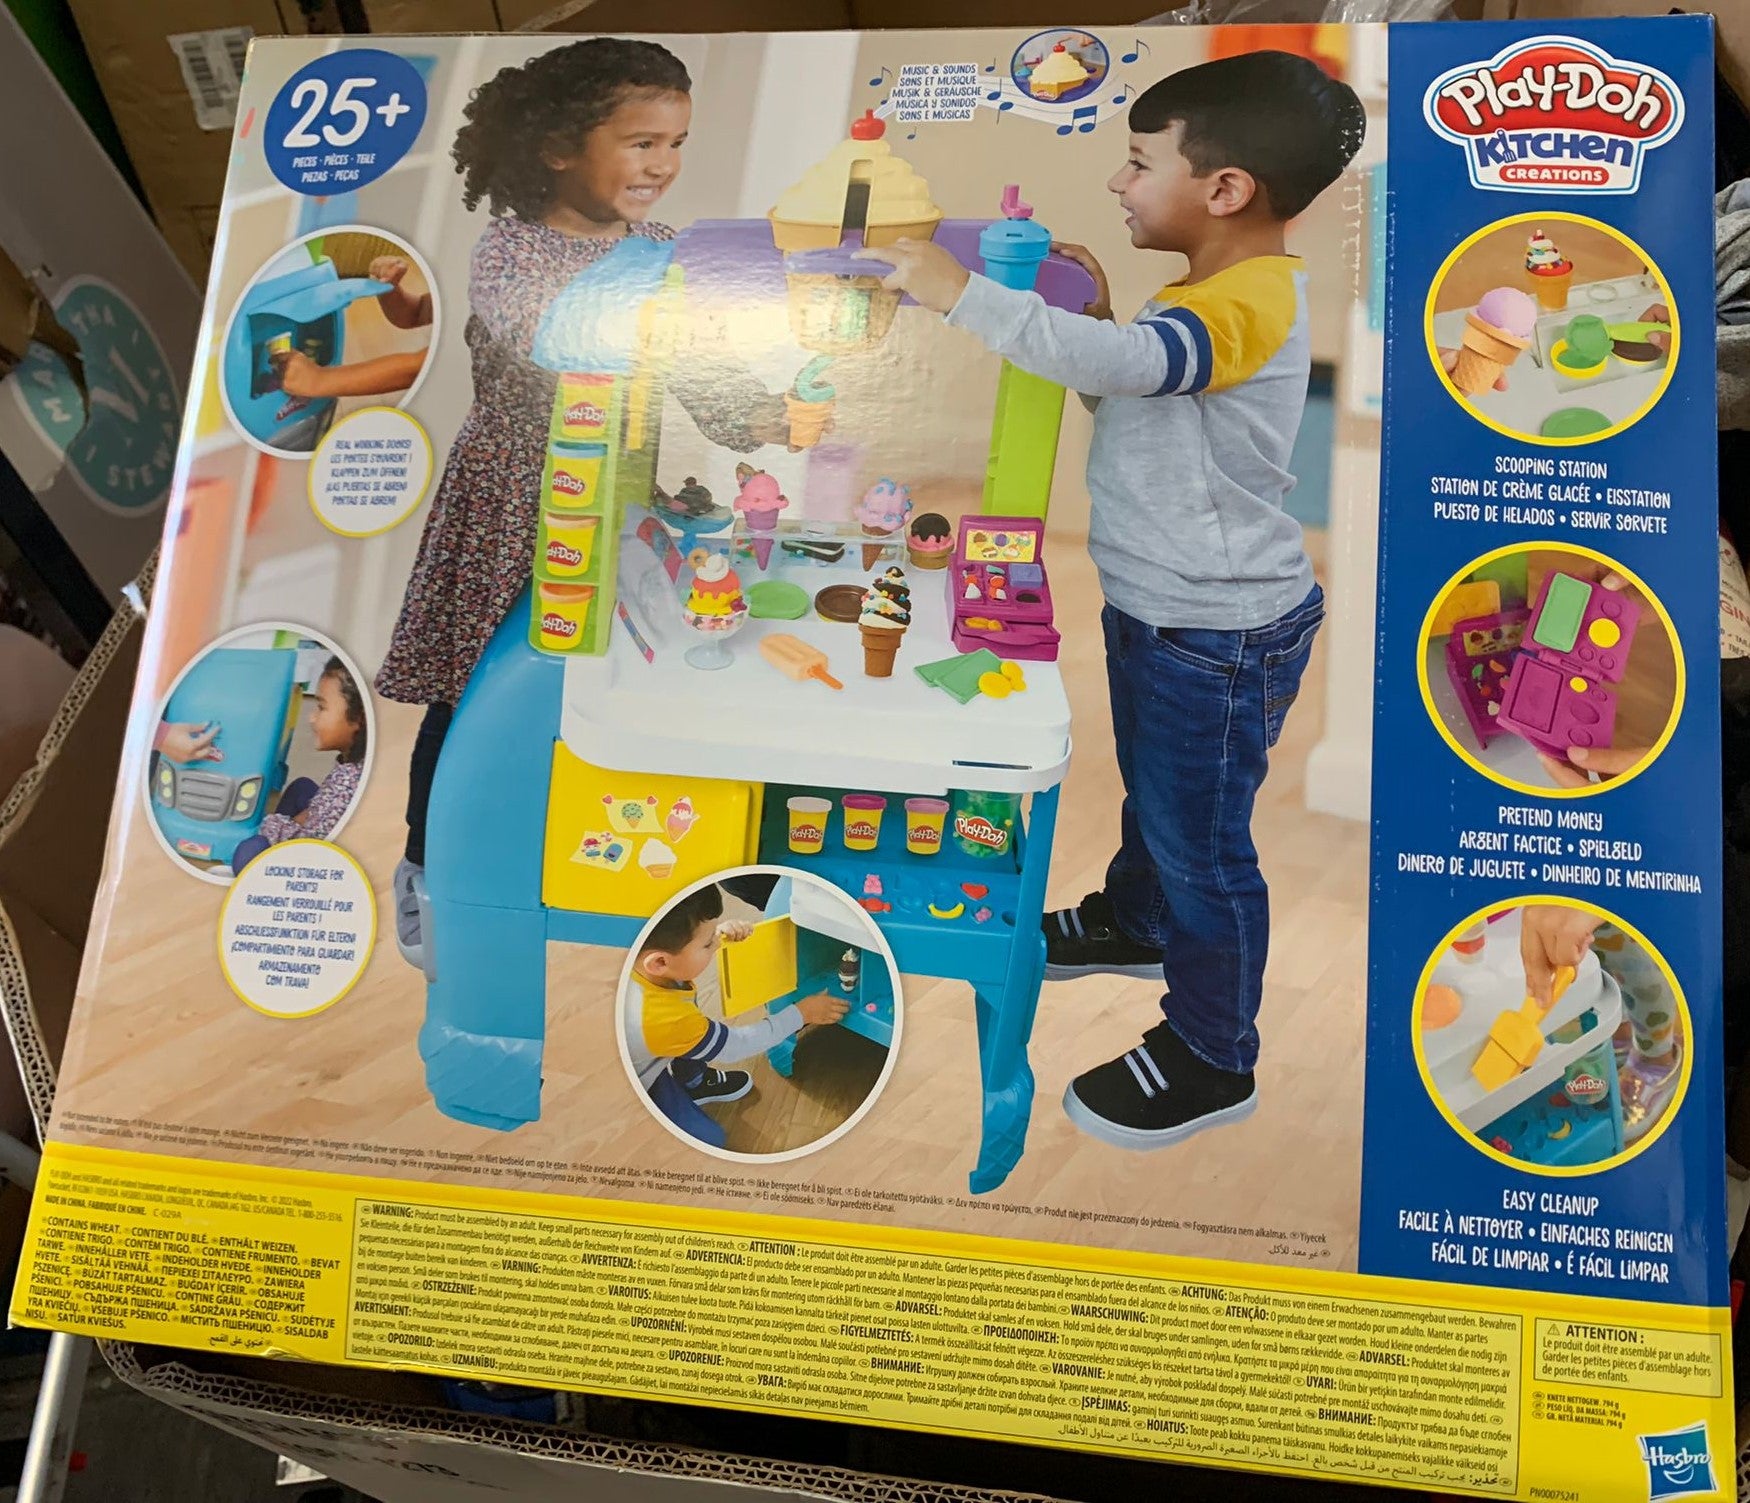 Play-Doh Kitchen Creations, Super Ultimate Ice Cream Truck Playset